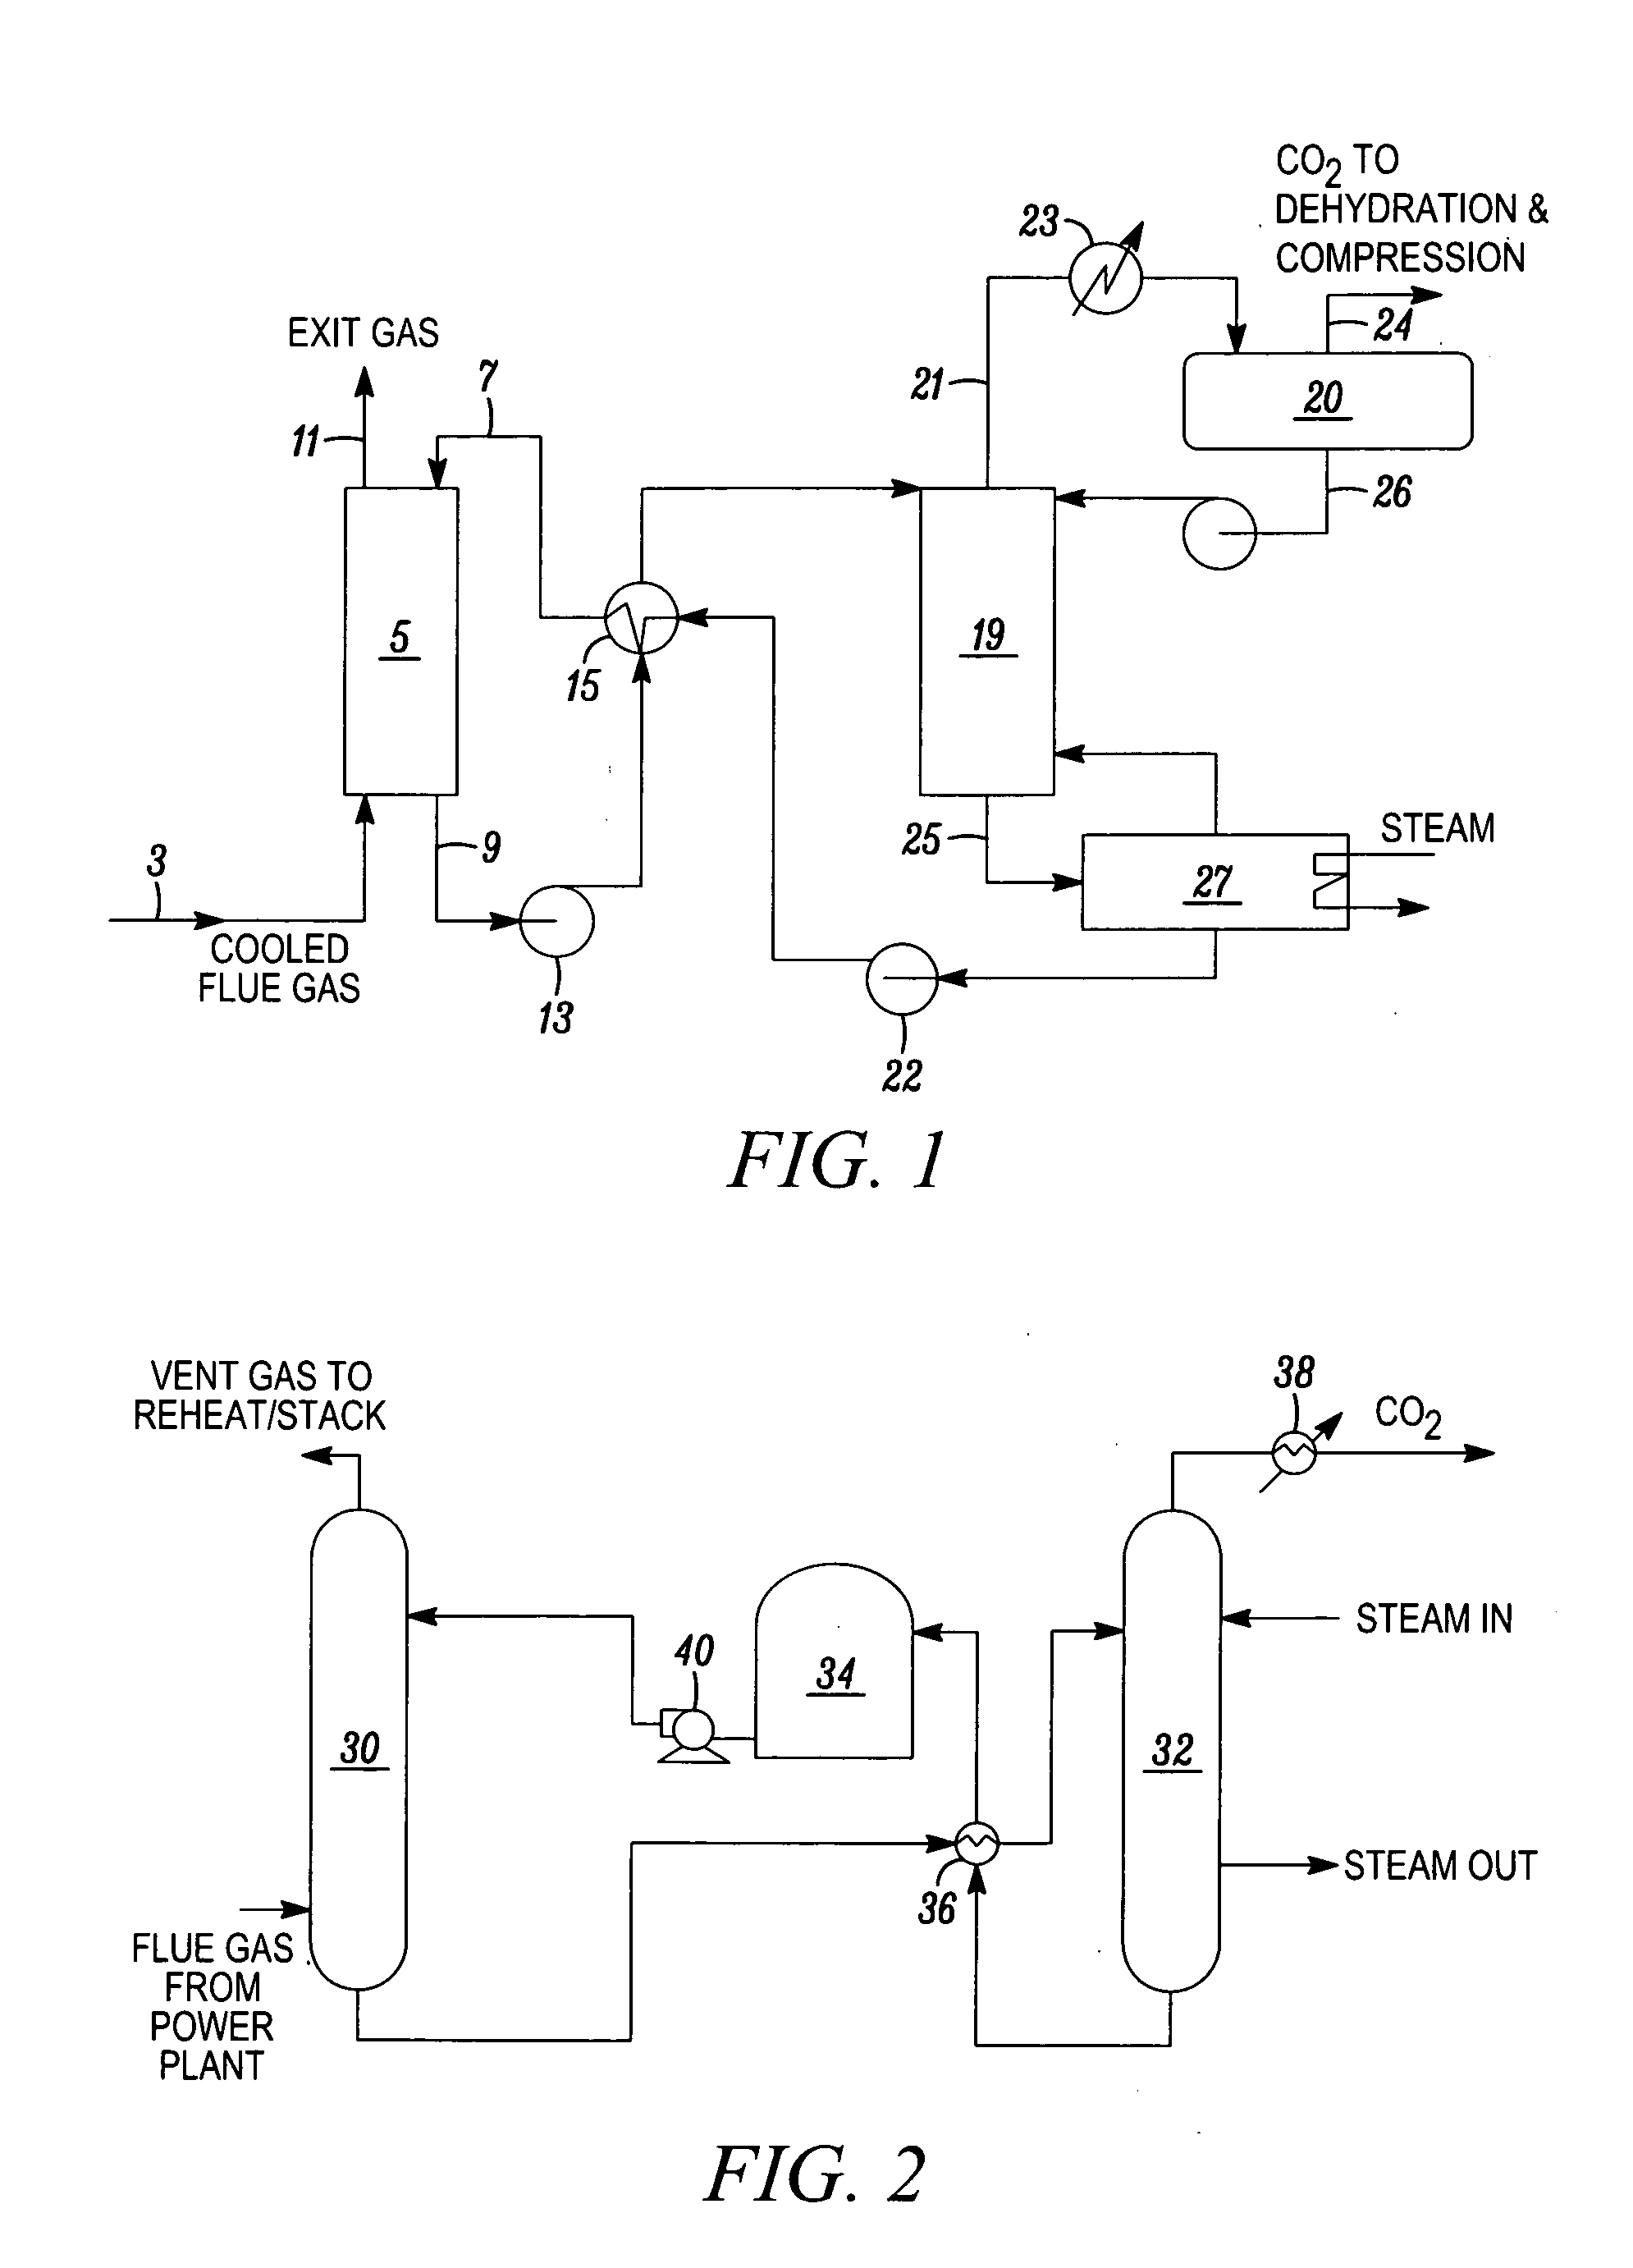 Method and apparatus for sequestering CO2 gas and releasing natural gas from coal and gas shale formations